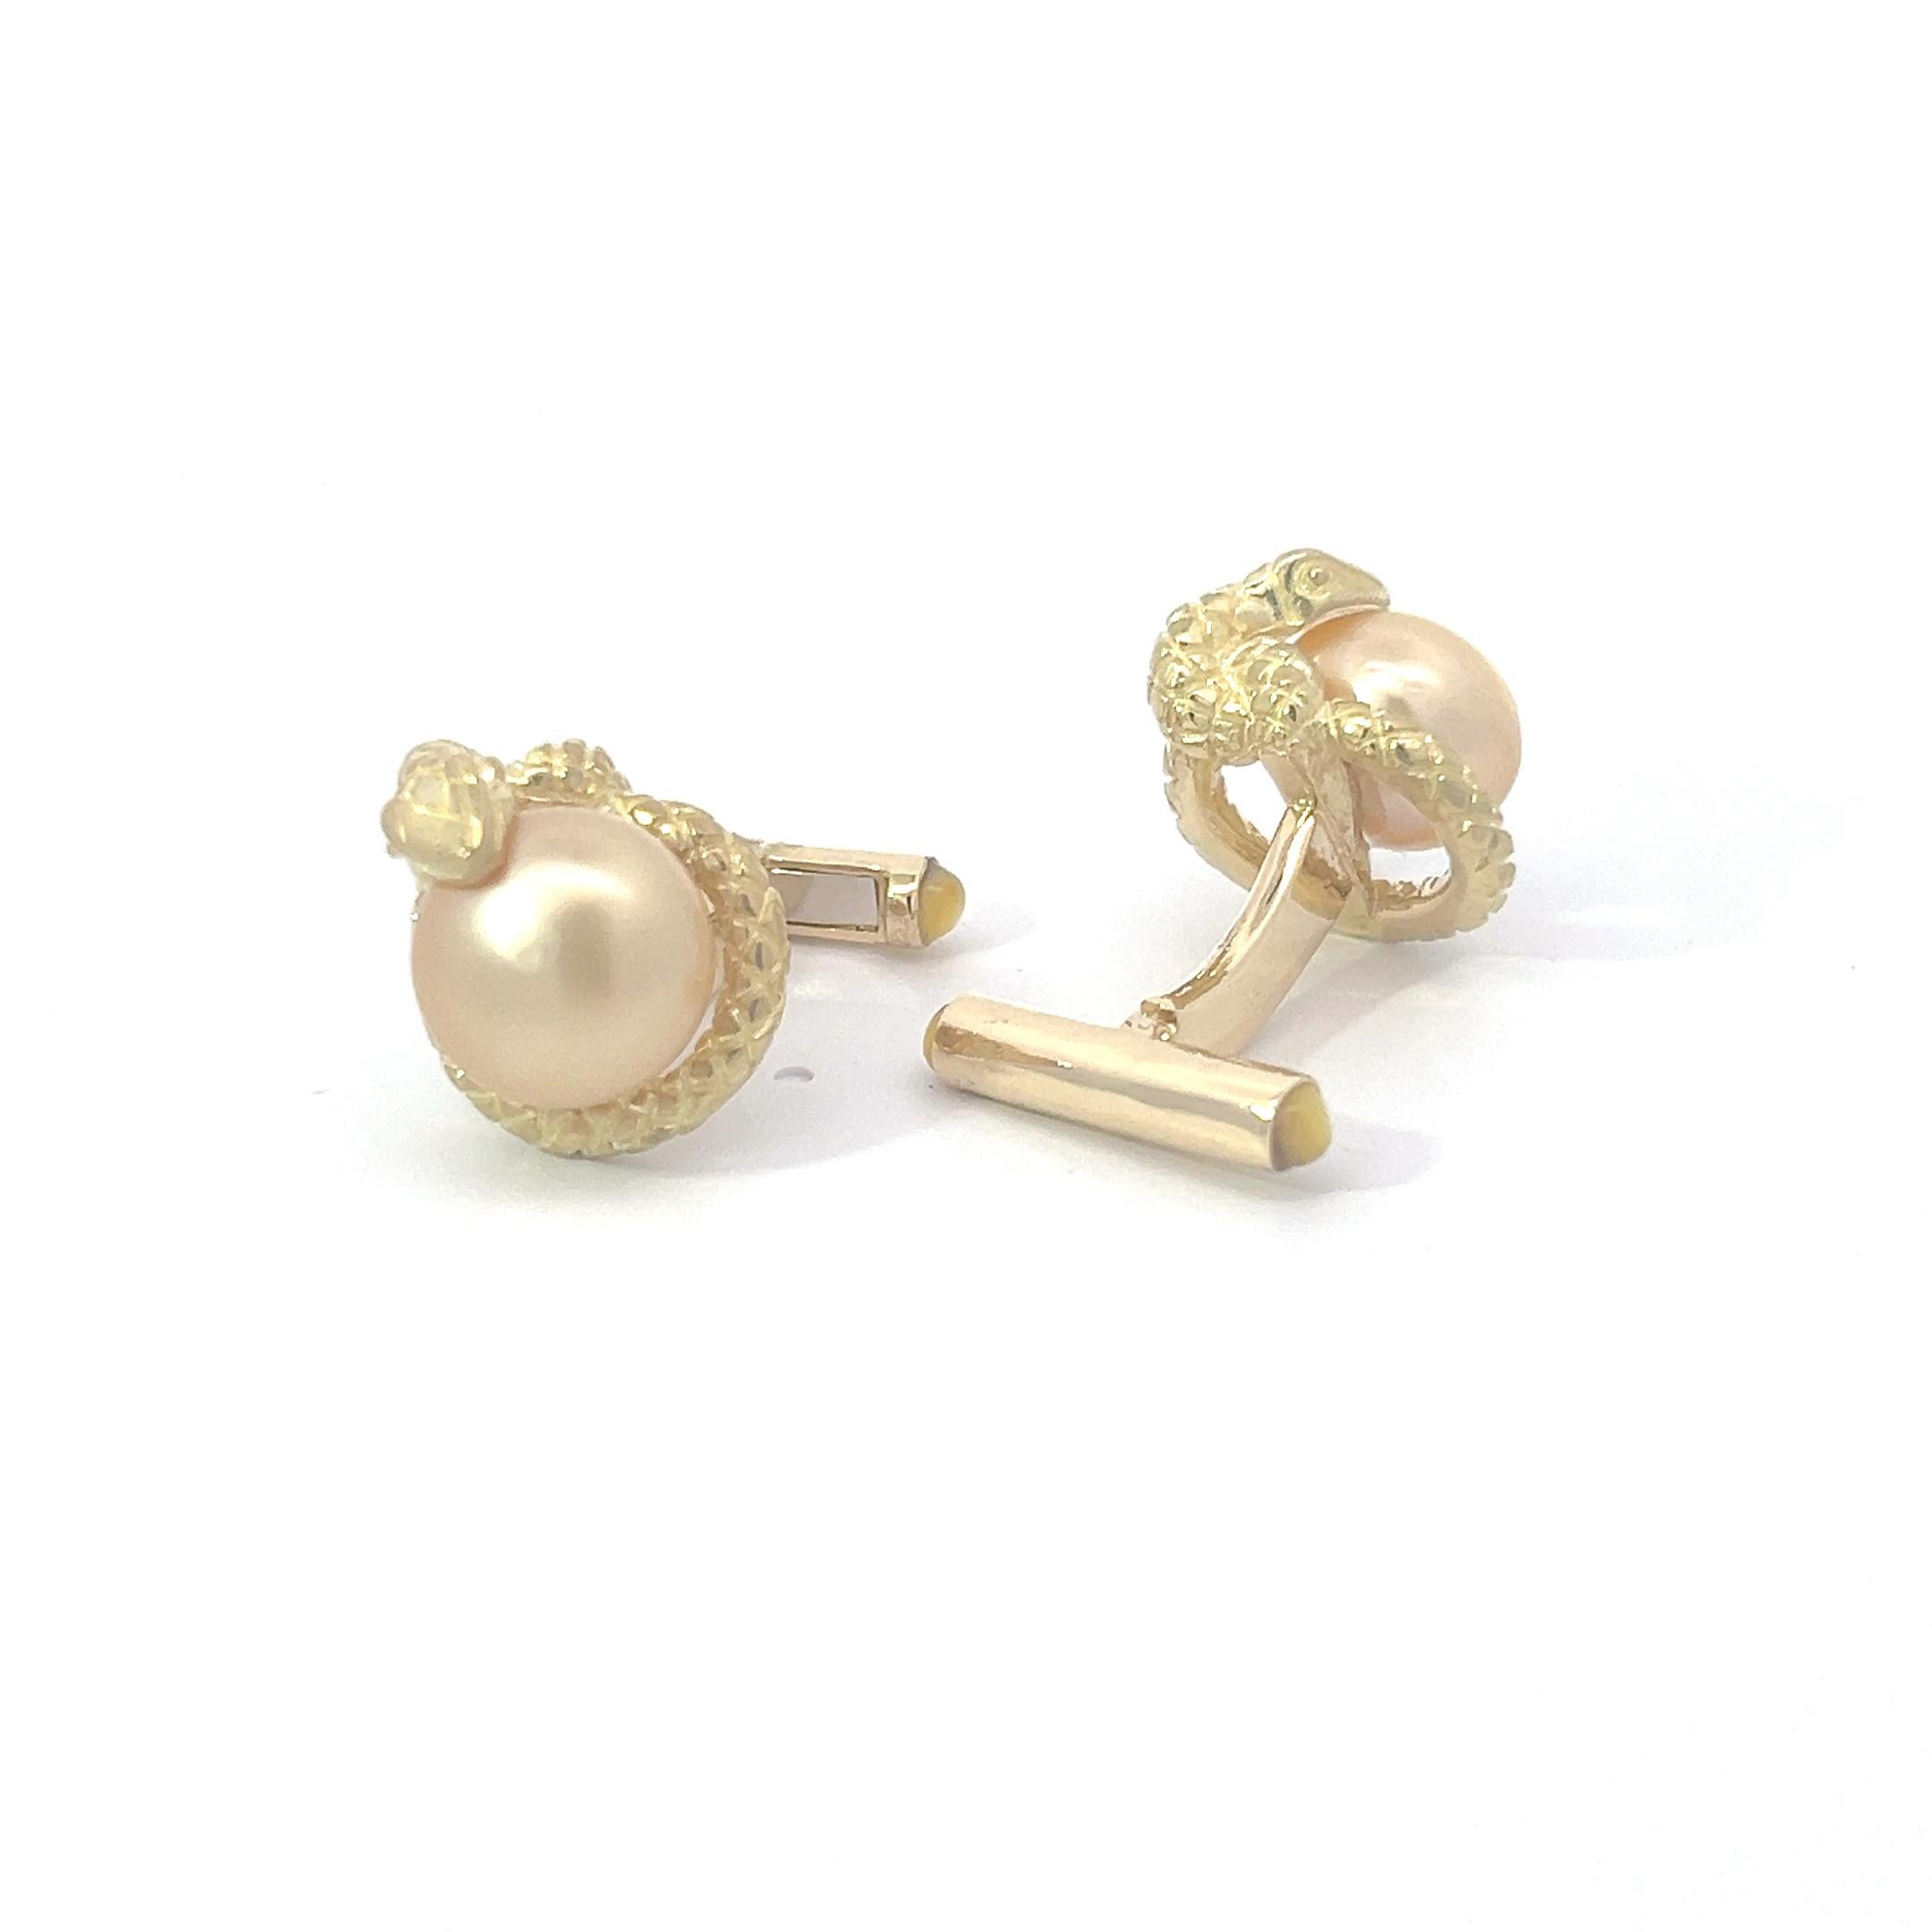 Presenting a pair of cufflinks that exude opulence and refinement, crafted in radiant 18k yellow gold. At the forefront of each cufflink, gleaming like treasures from the depths of the ocean, are luminous yellow South Sea pearls. These pearls,